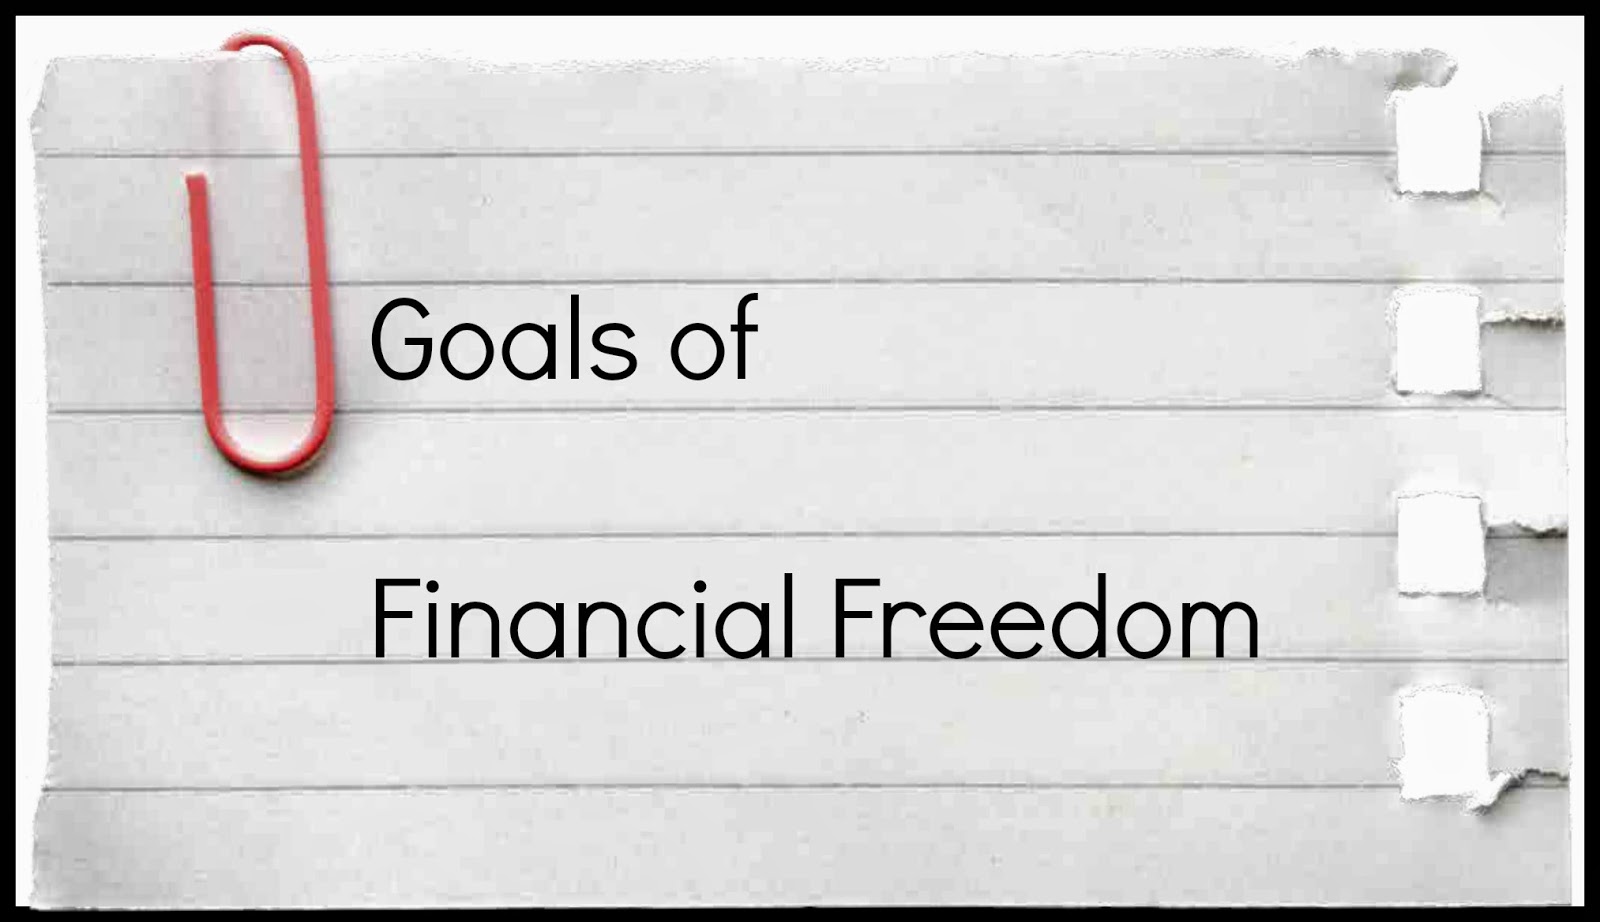 Goals of Financial Freedom